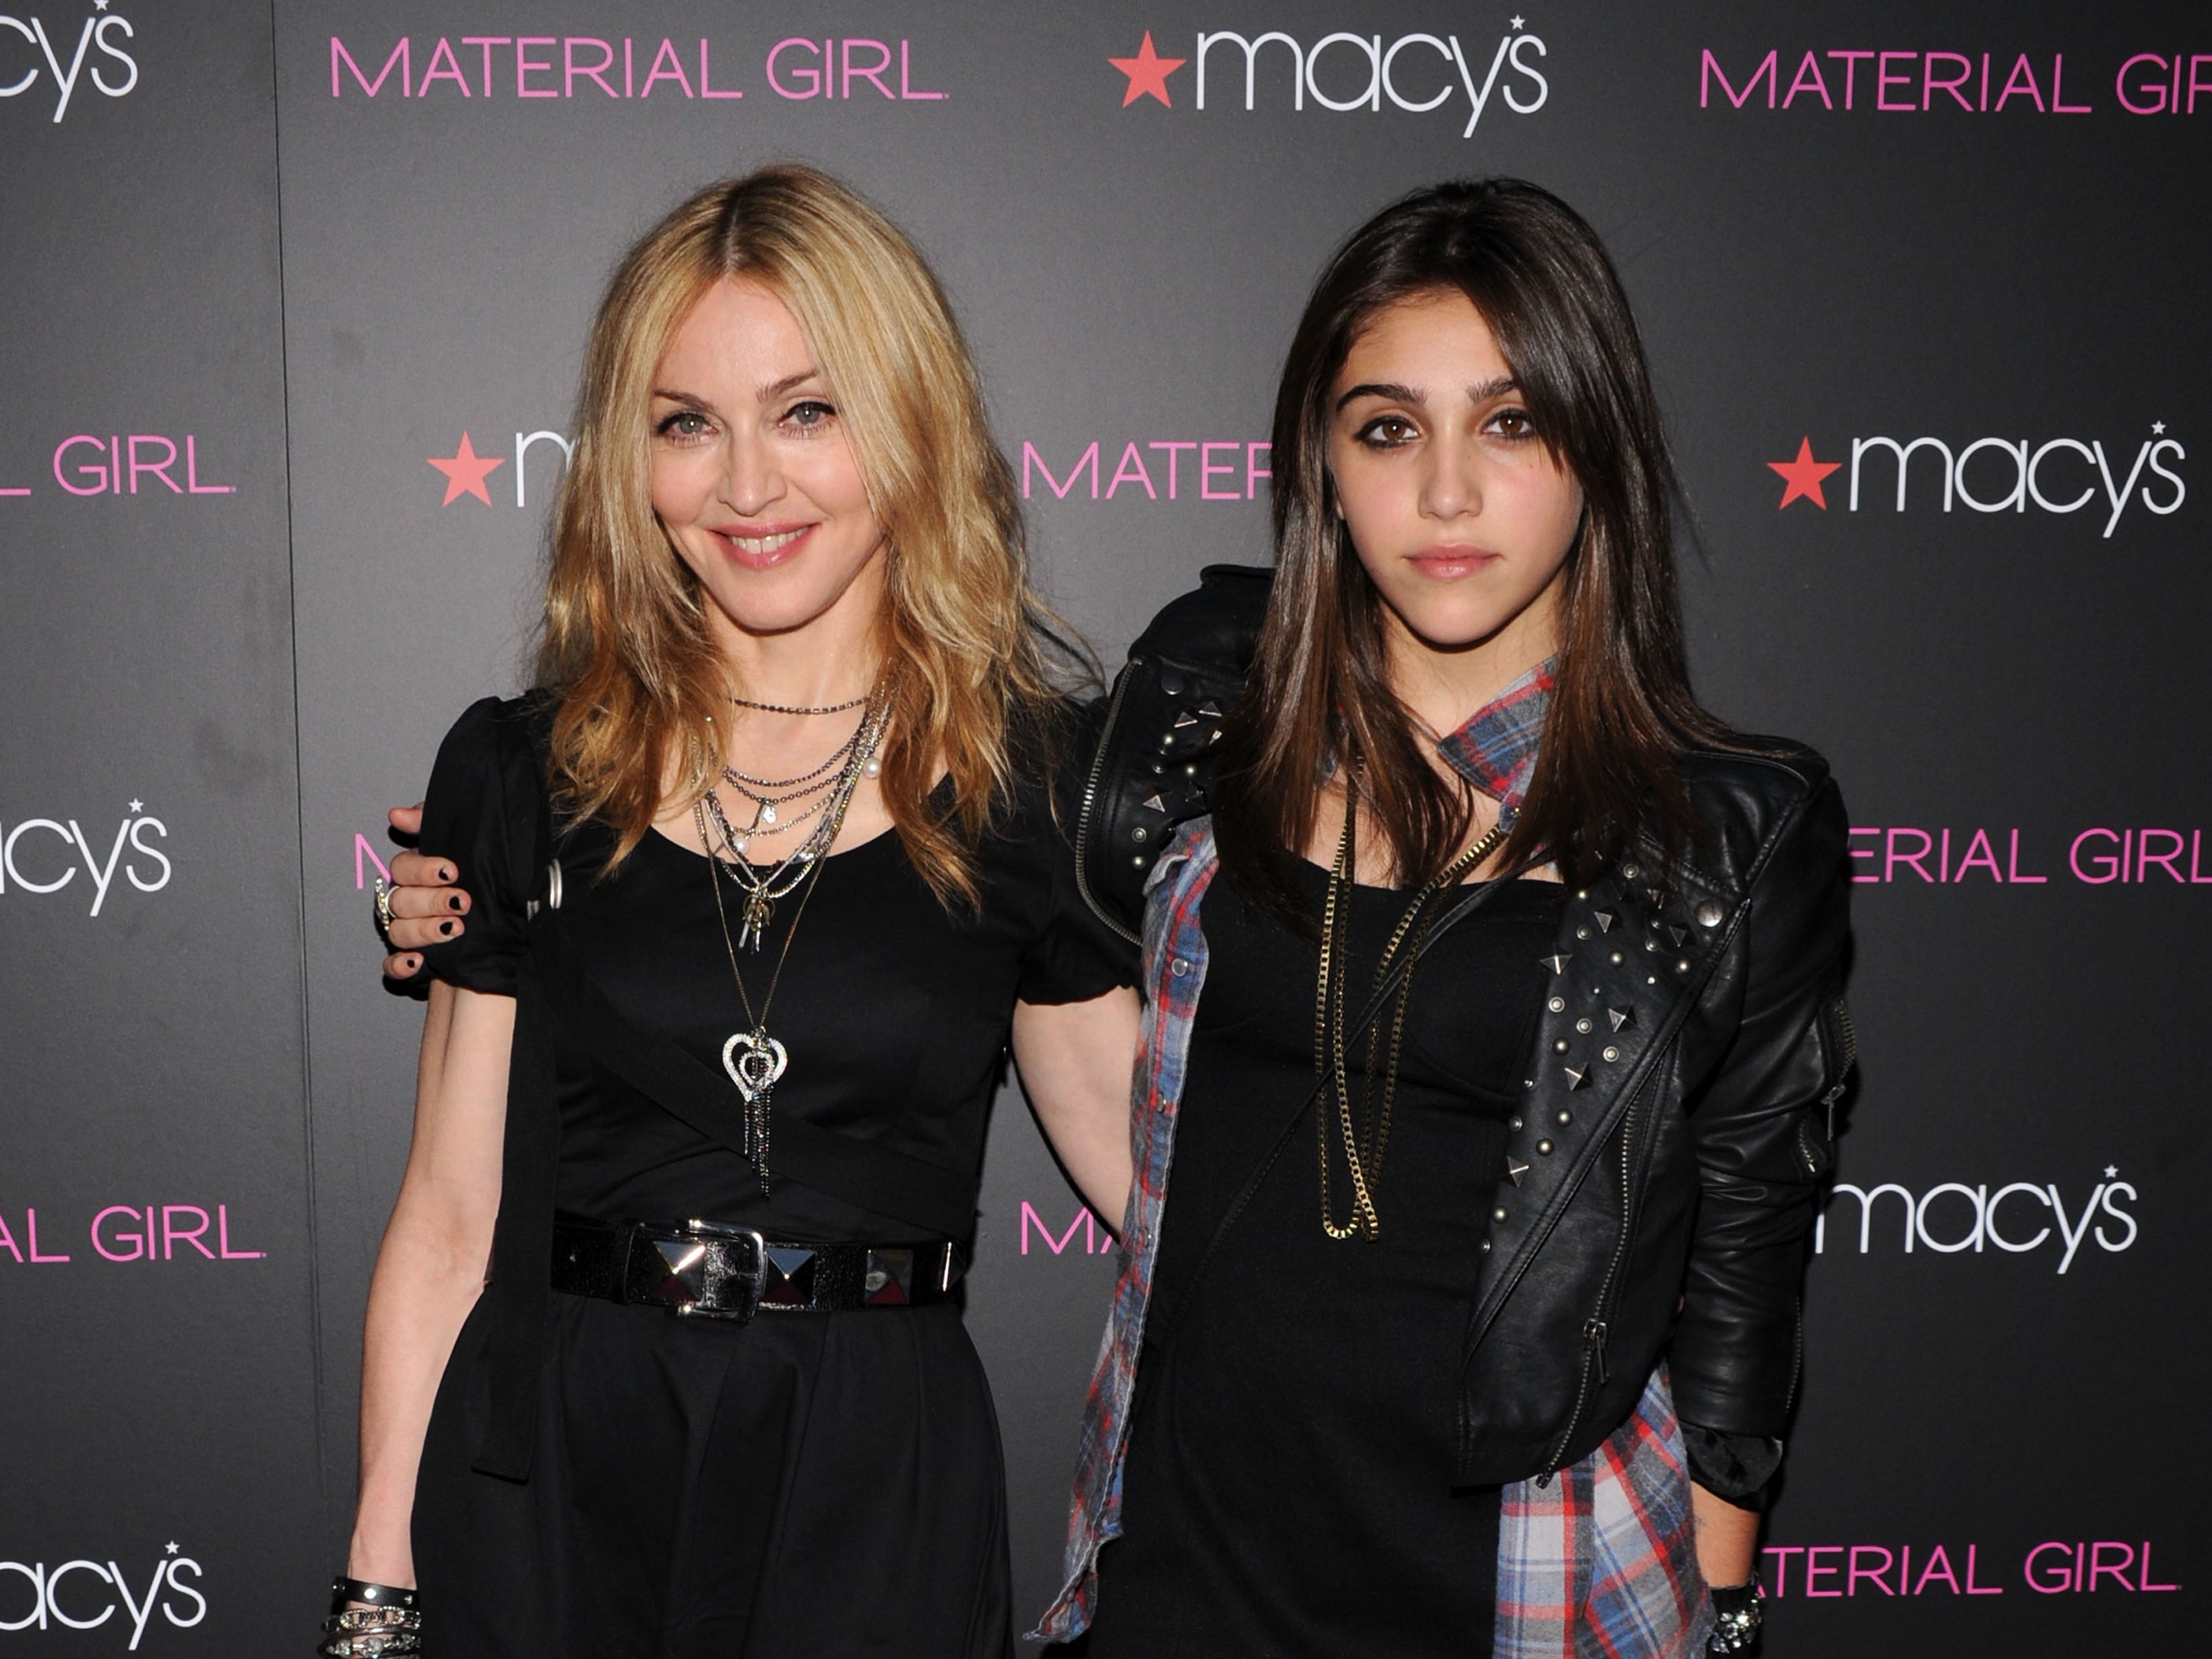 Lourdes Leon addresses claims she’s a ‘talentless rich kid'